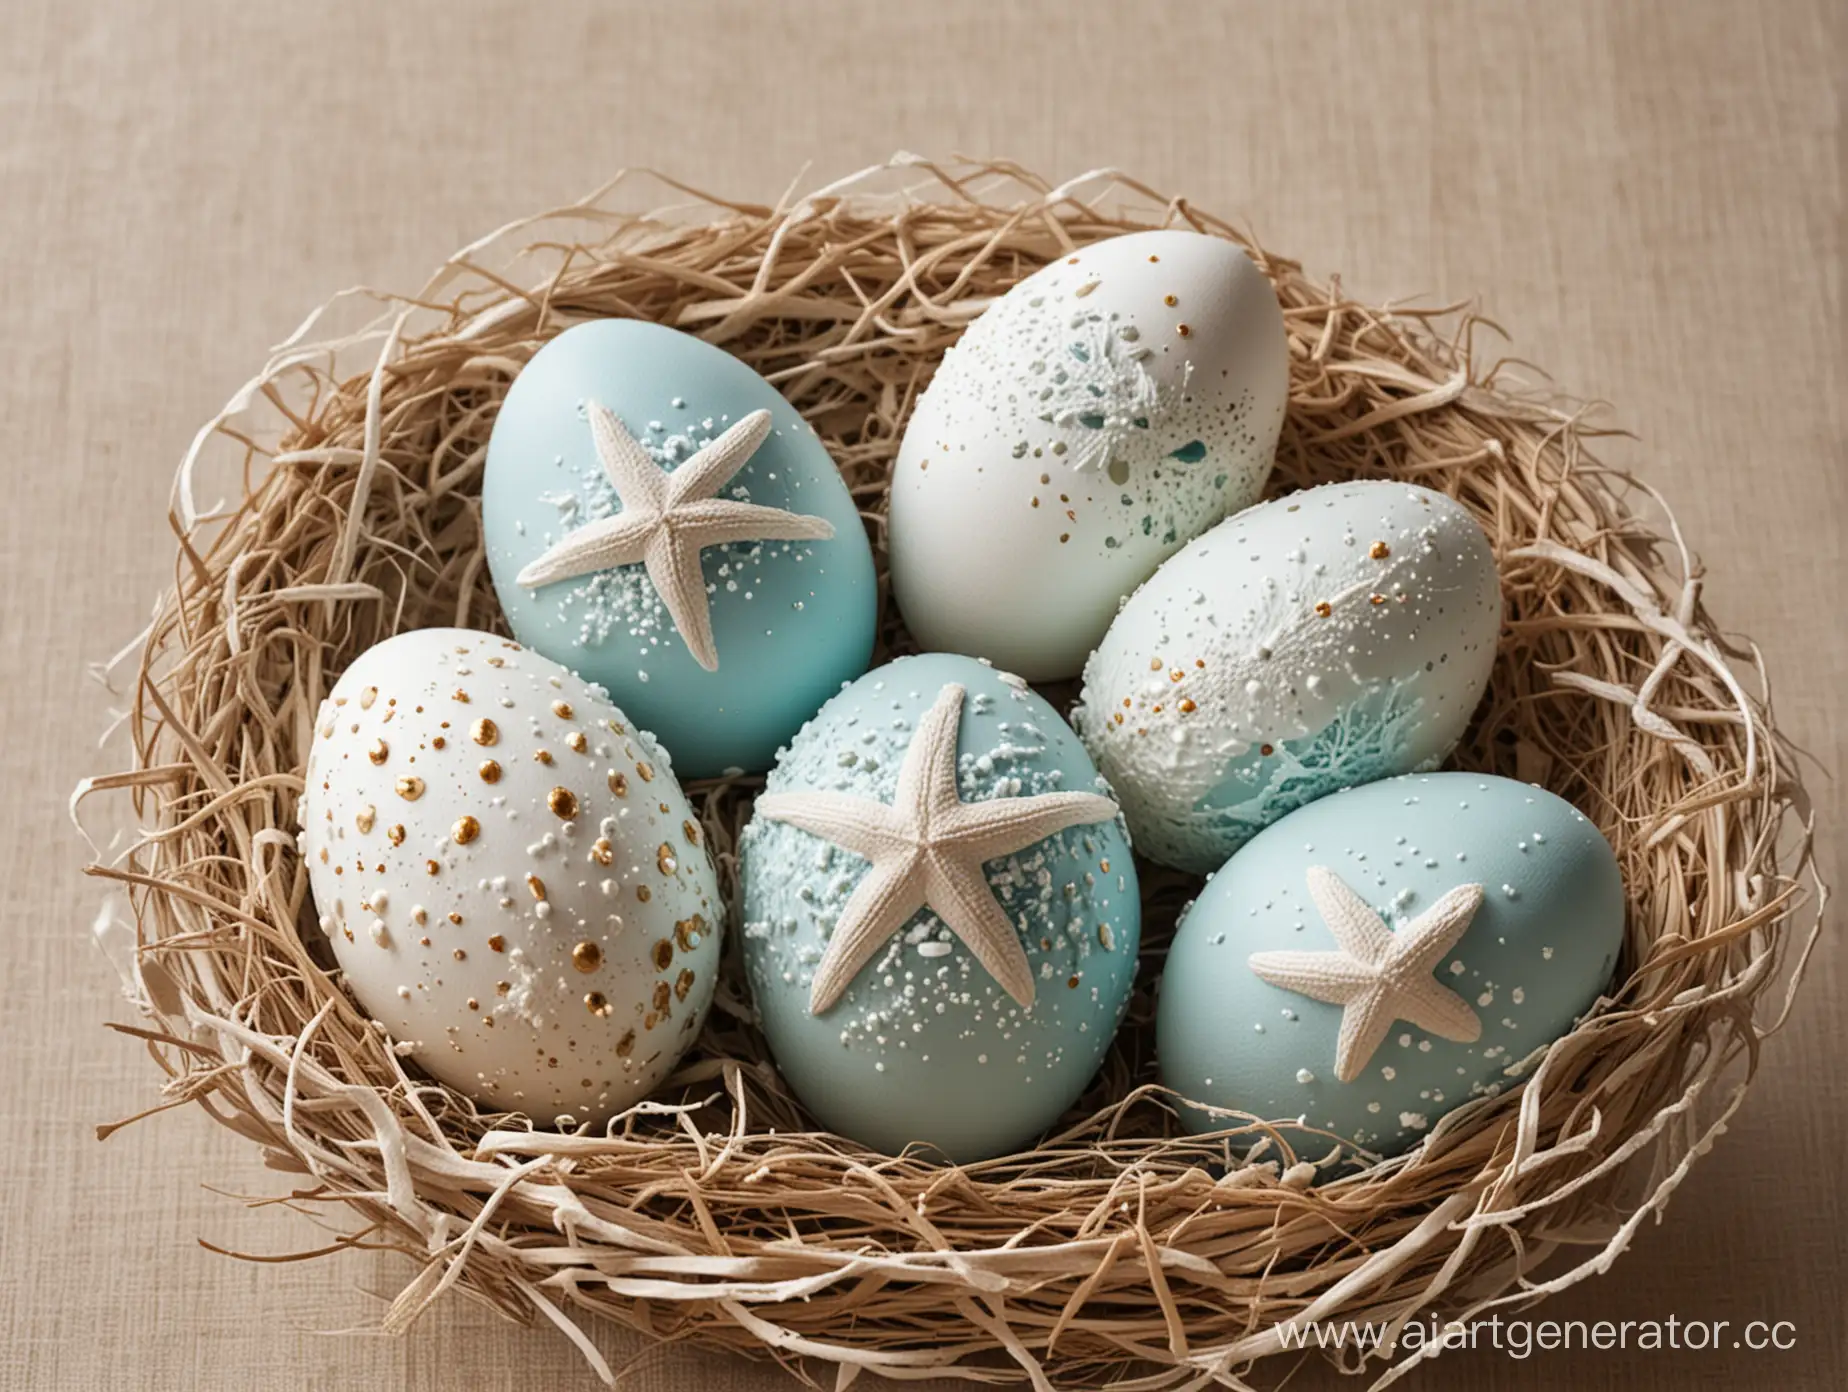 Seaside-Easter-Celebration-with-Decorative-Eggs